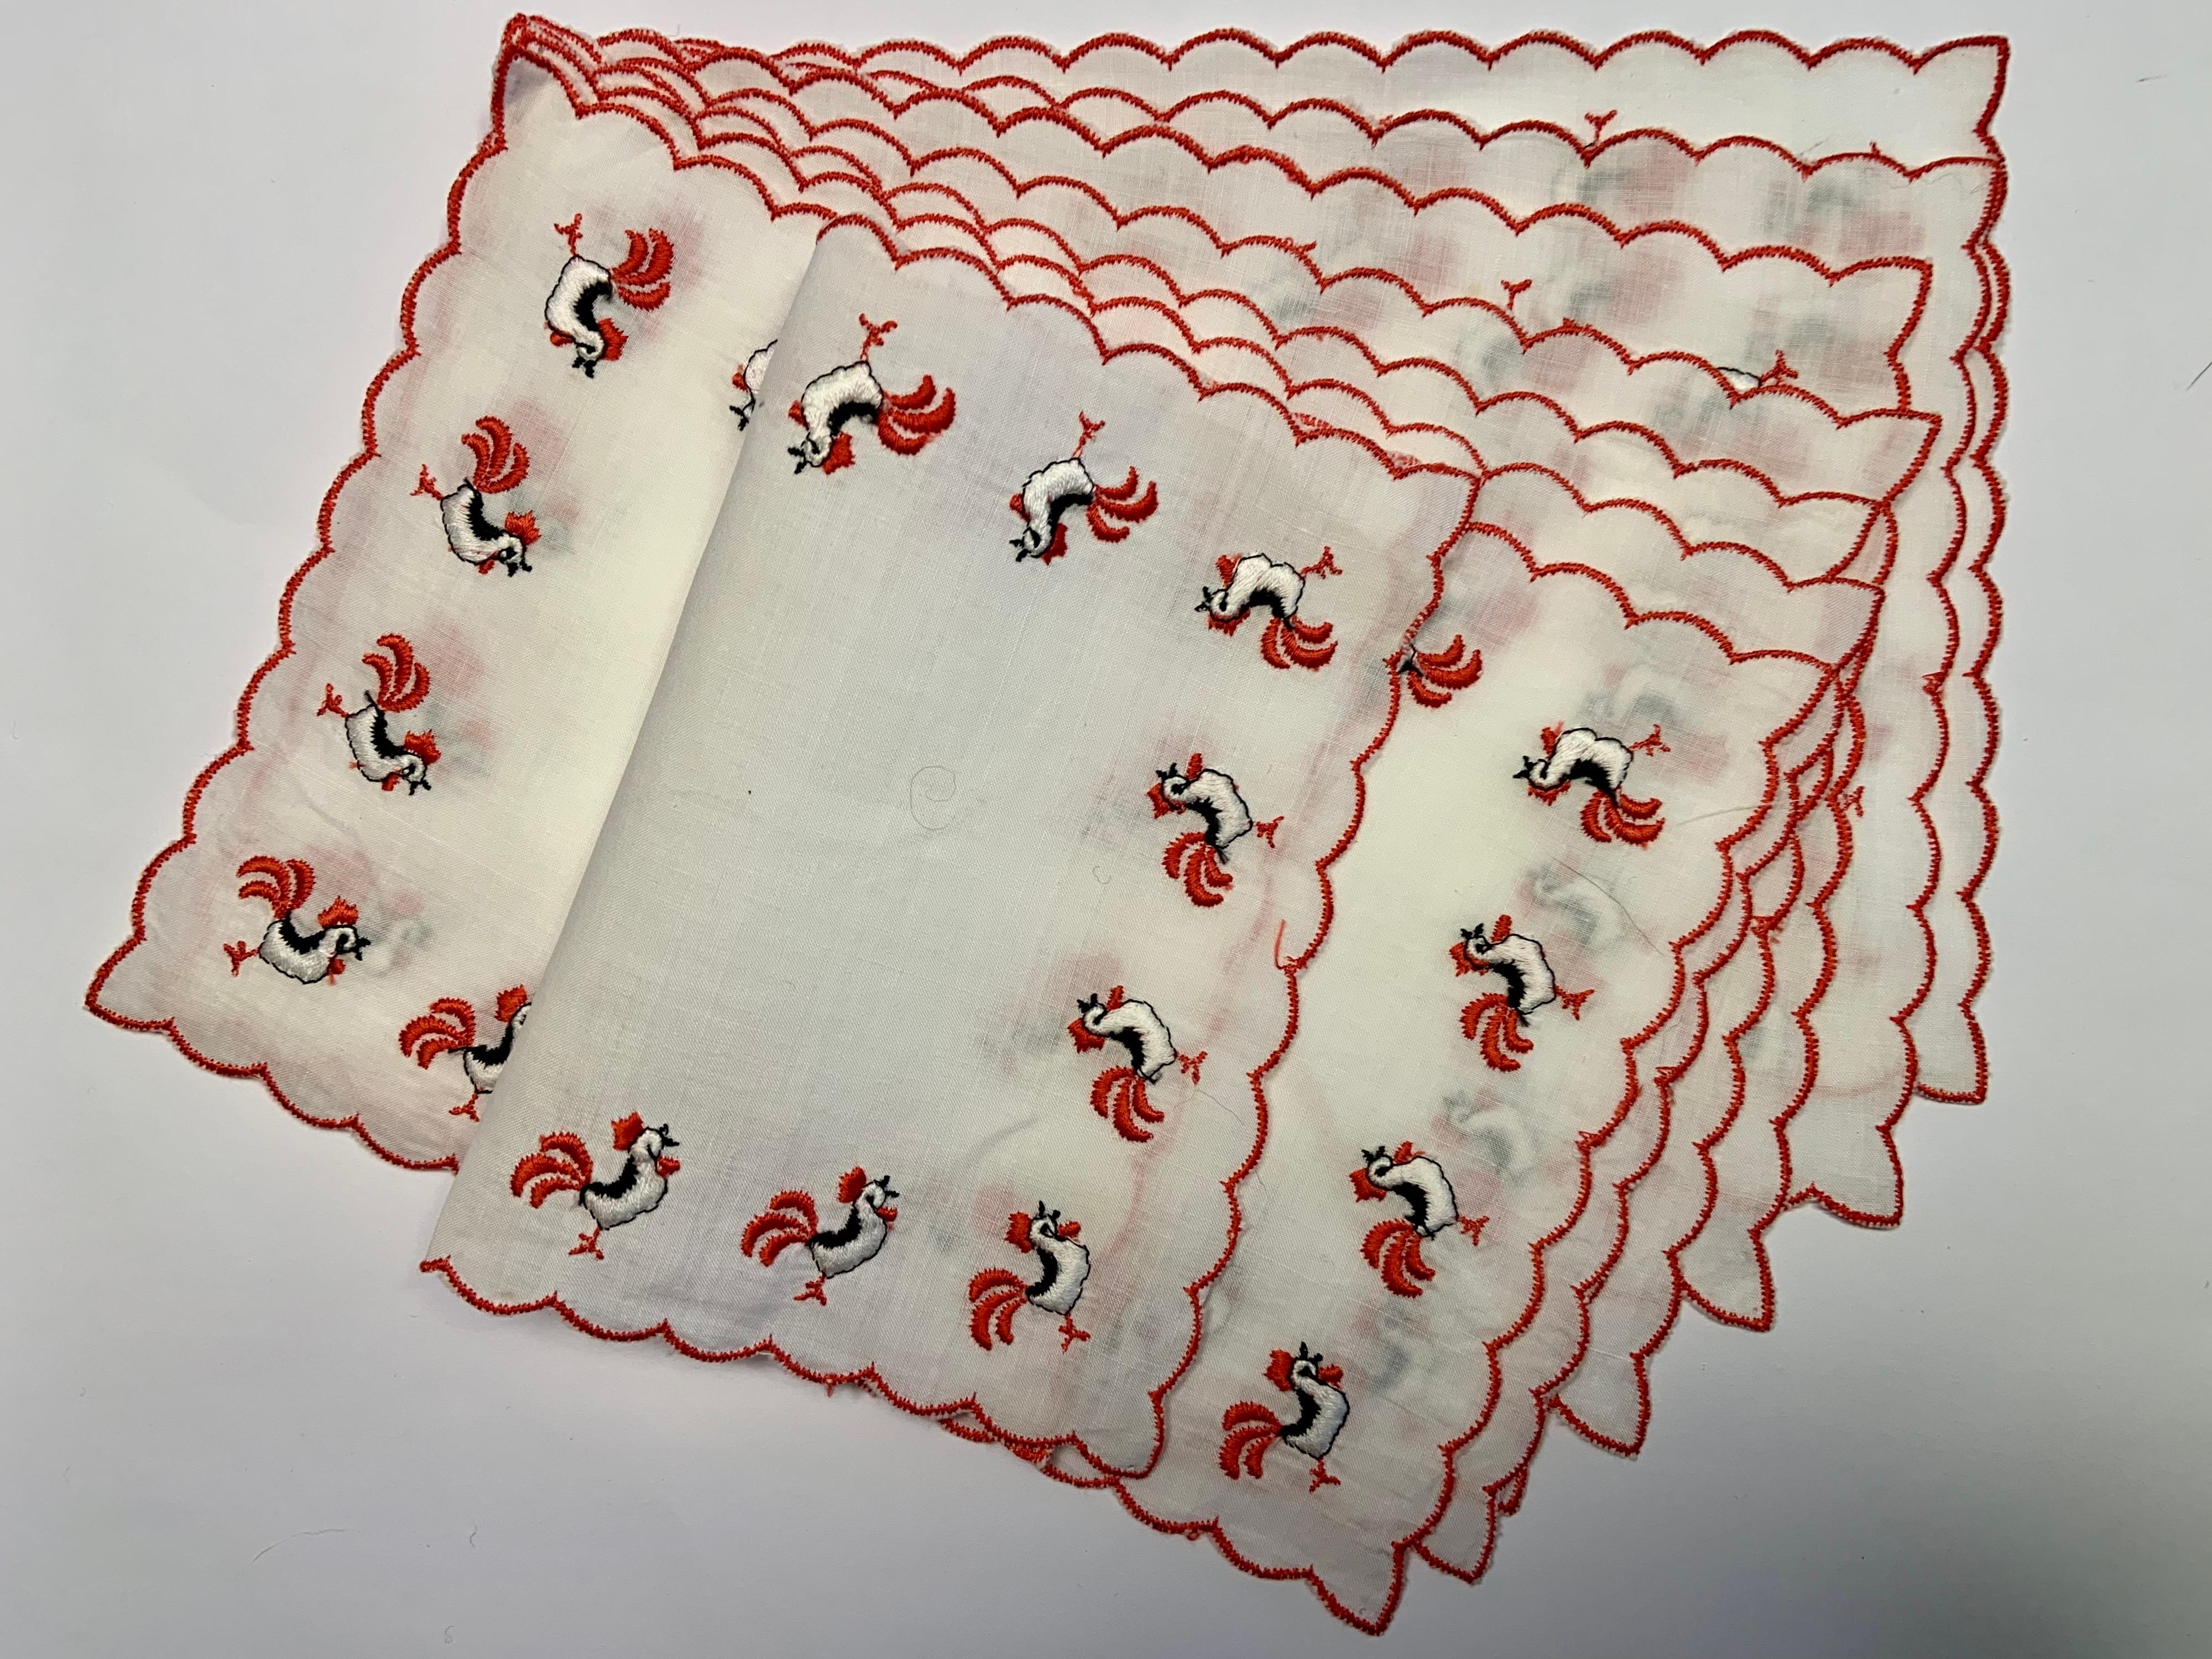 The rooster is the unofficial mascot of cocktails, seen on napkins, glasses and cocktail shakers.  This set of eight cocktail napkins has red scalloped edges and embroidered red, white and black roosters on all four sides.  They are in excellent